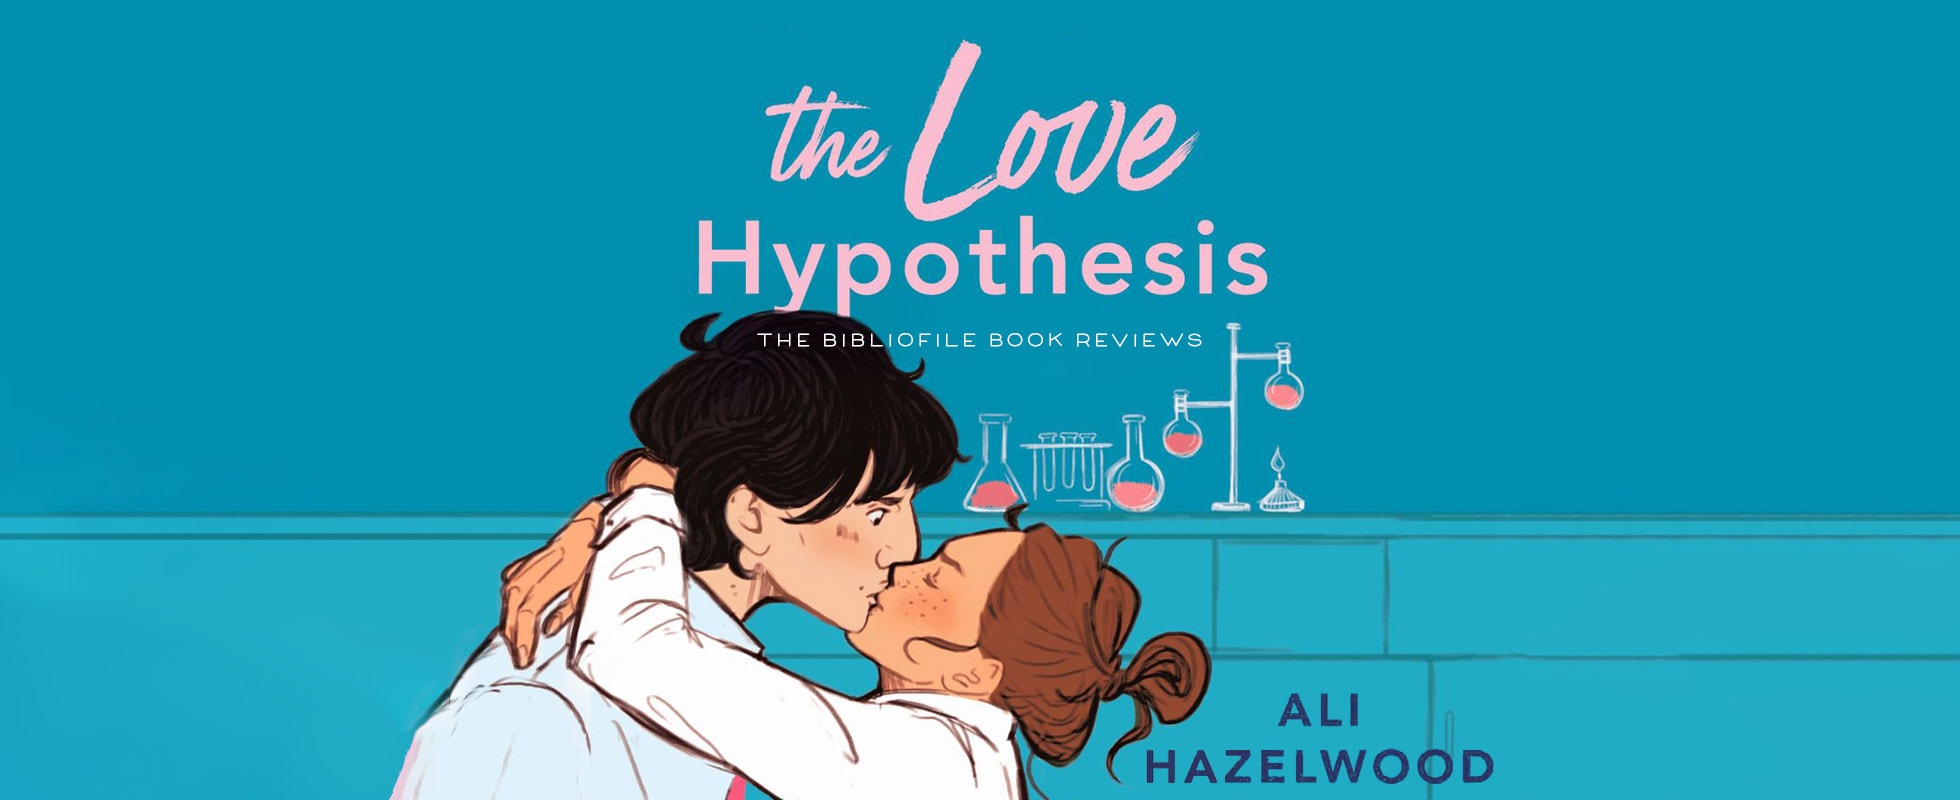 the love hypothesis by ali hazelwood book review plot summary synopsis recap discussion spoilers